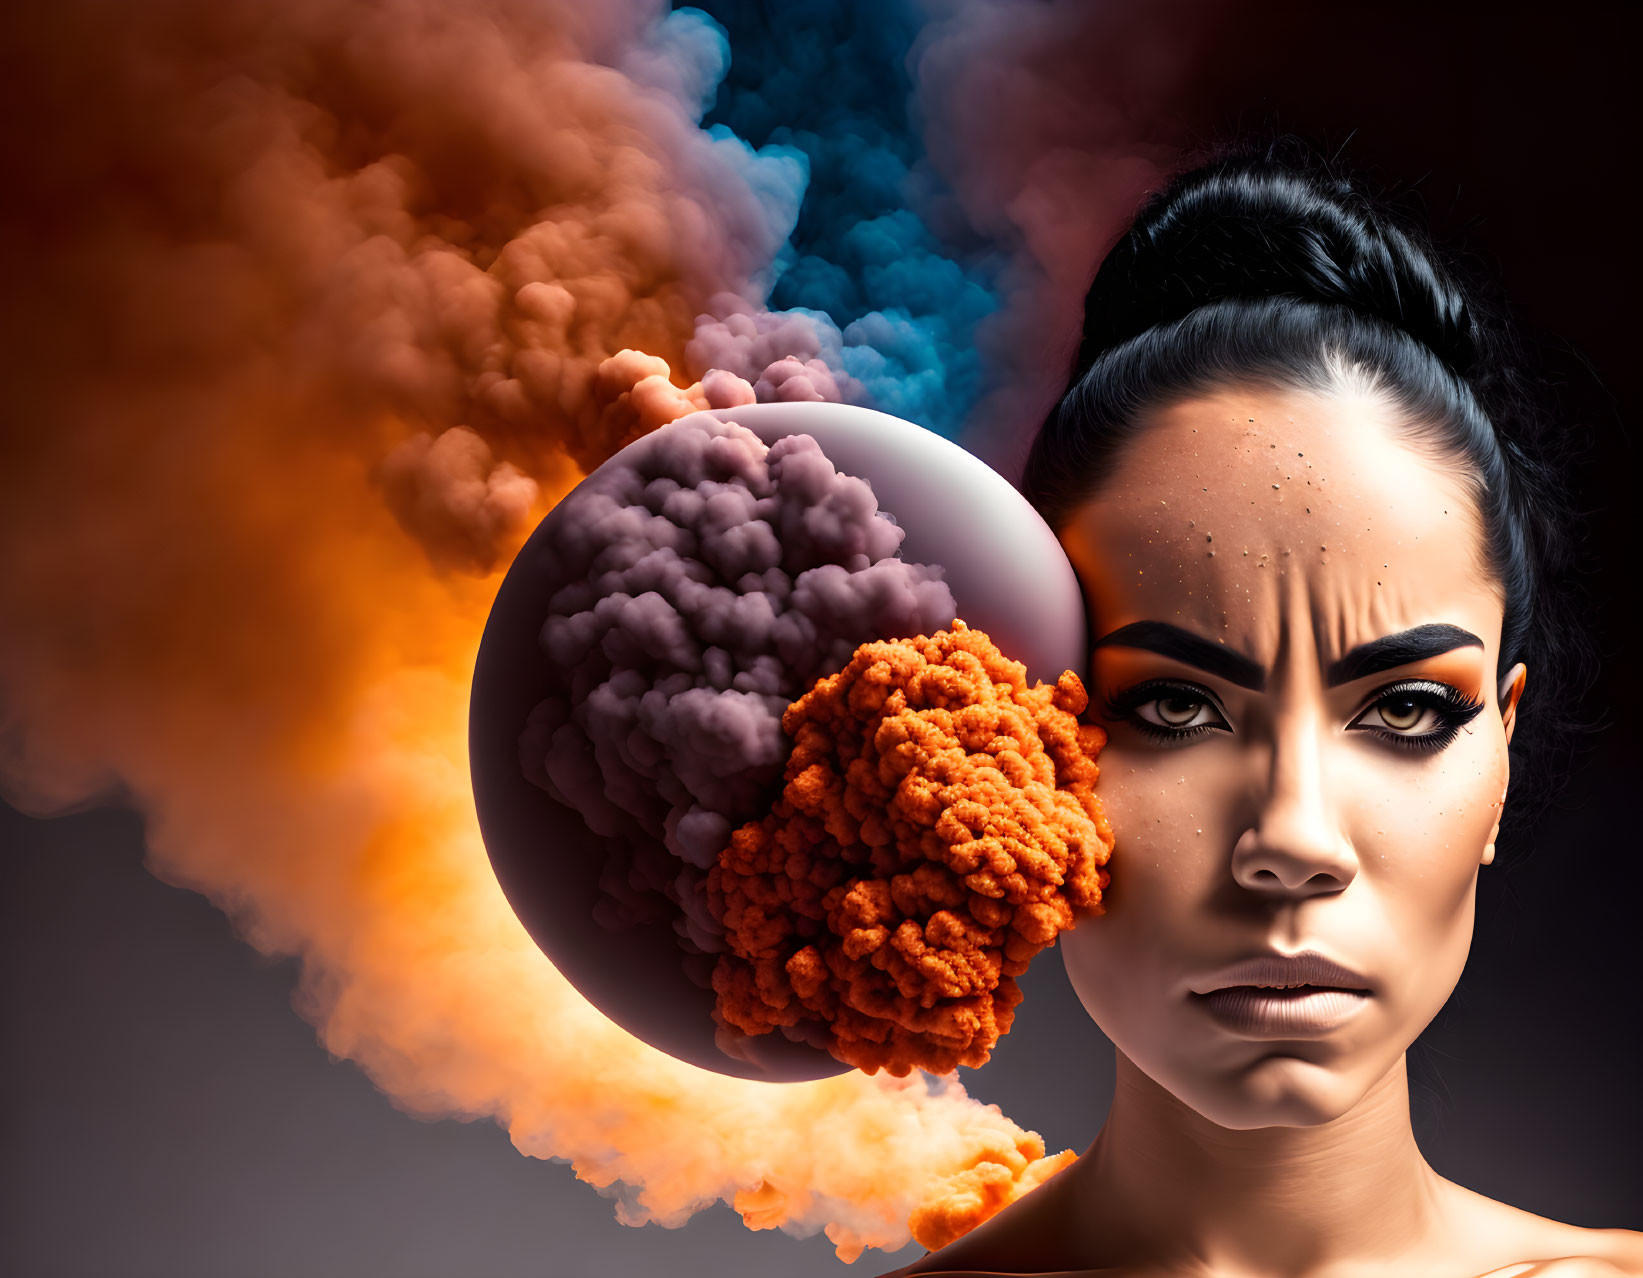 Woman with dramatic makeup beside colorful smoke clouds creates surreal atmosphere